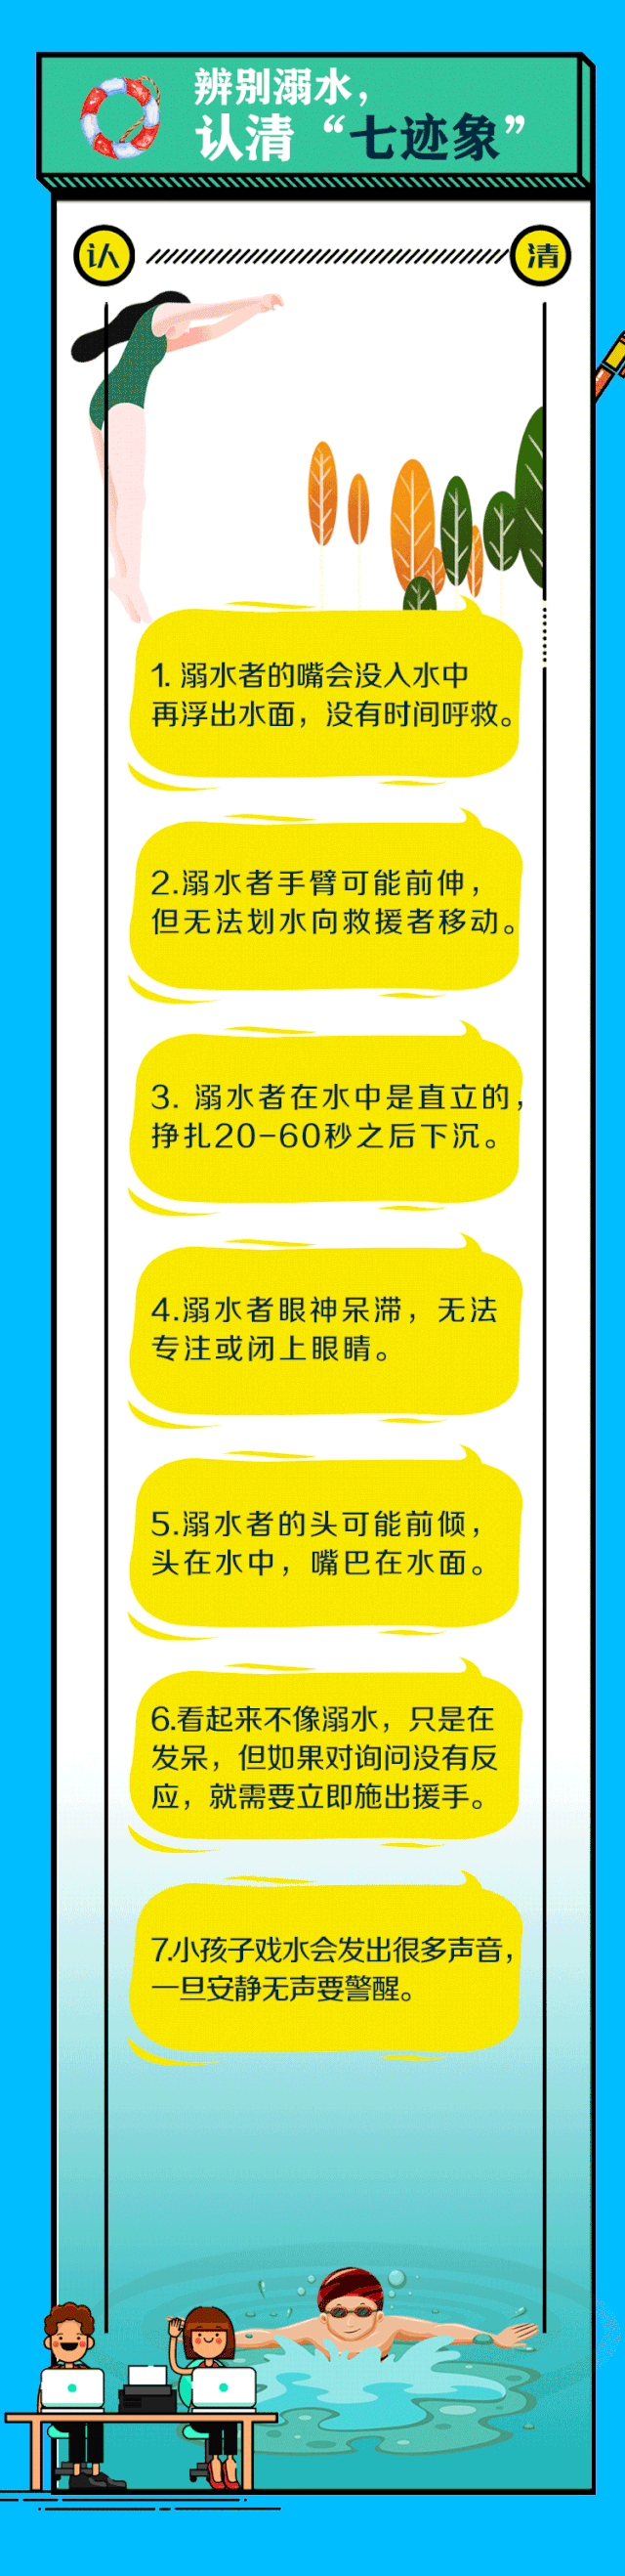 【PIEP·安全知识】防“溺”于未然，守护生命  Safety Knowledge of Drowning Prevention